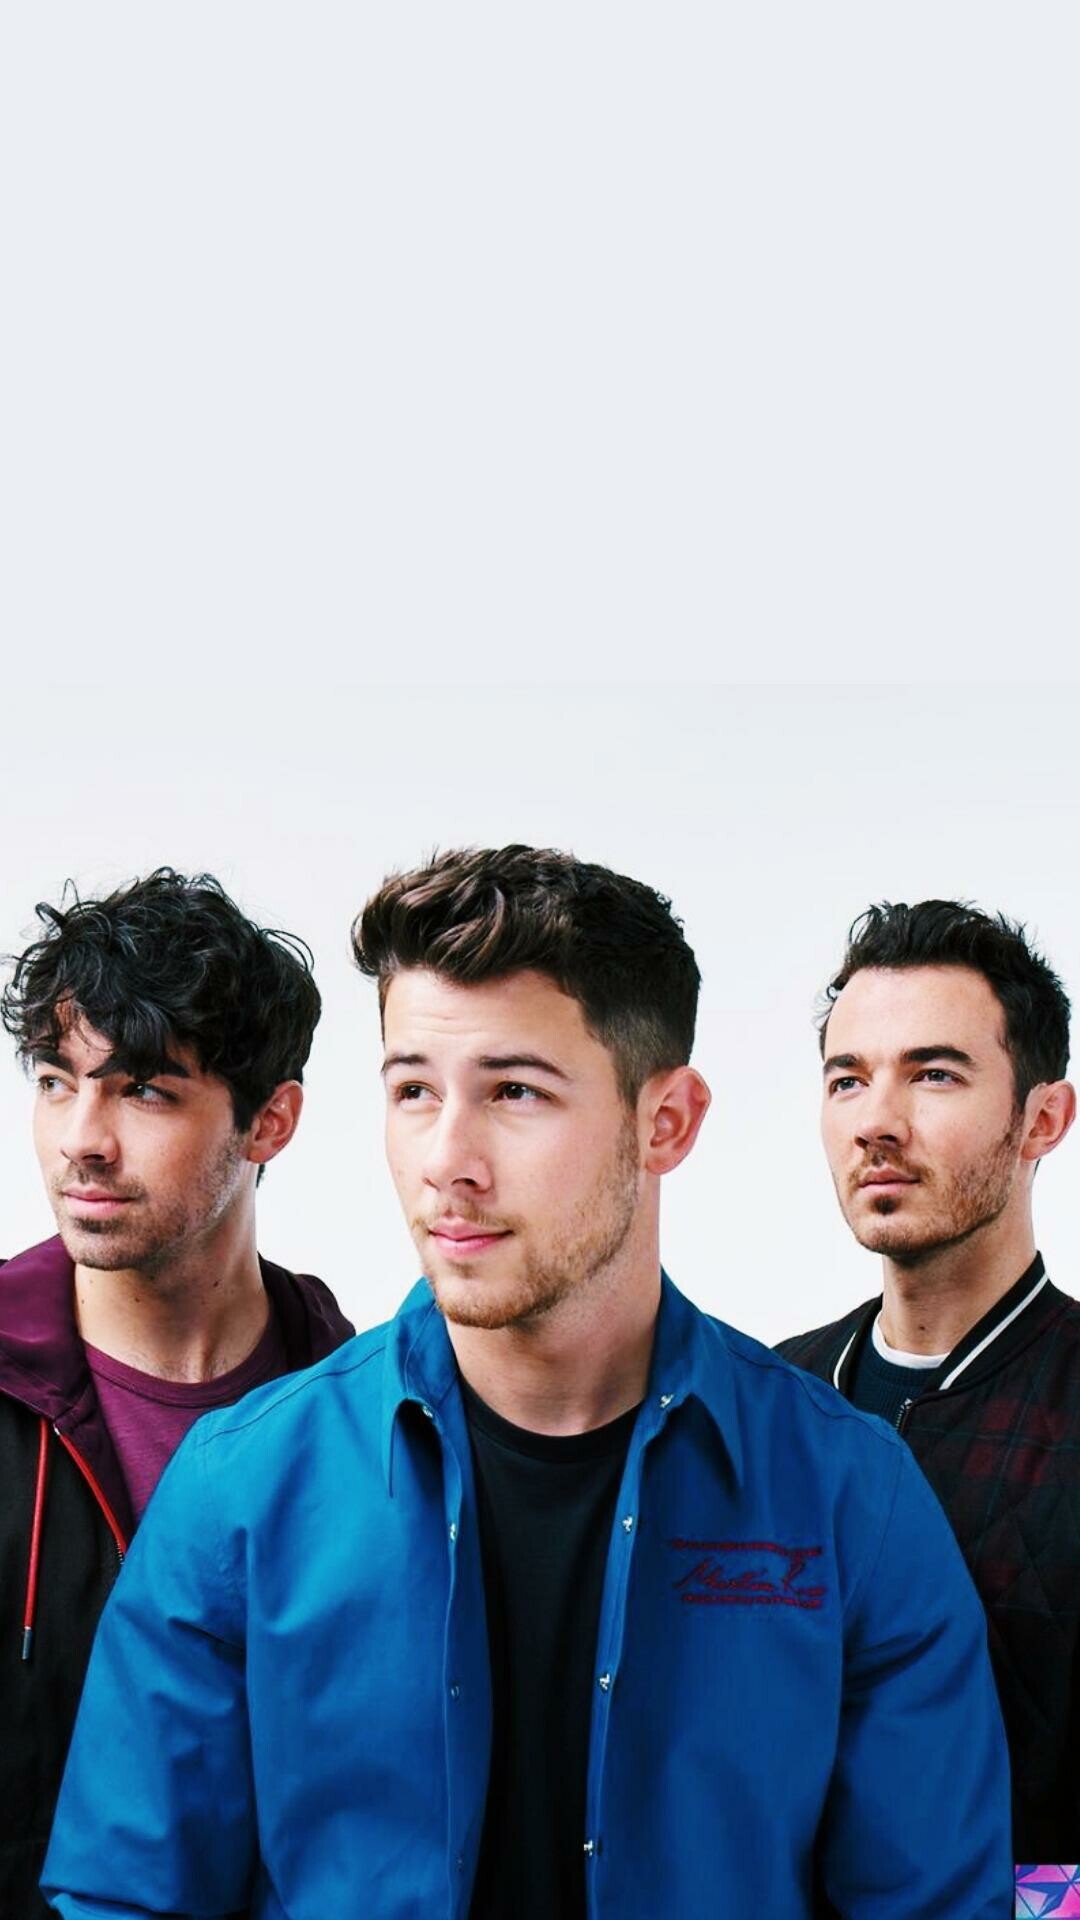 Jonas Brothers: The song "Lovebug" was revealed at the 2008 MTV Video Music Awards. 1080x1920 Full HD Wallpaper.